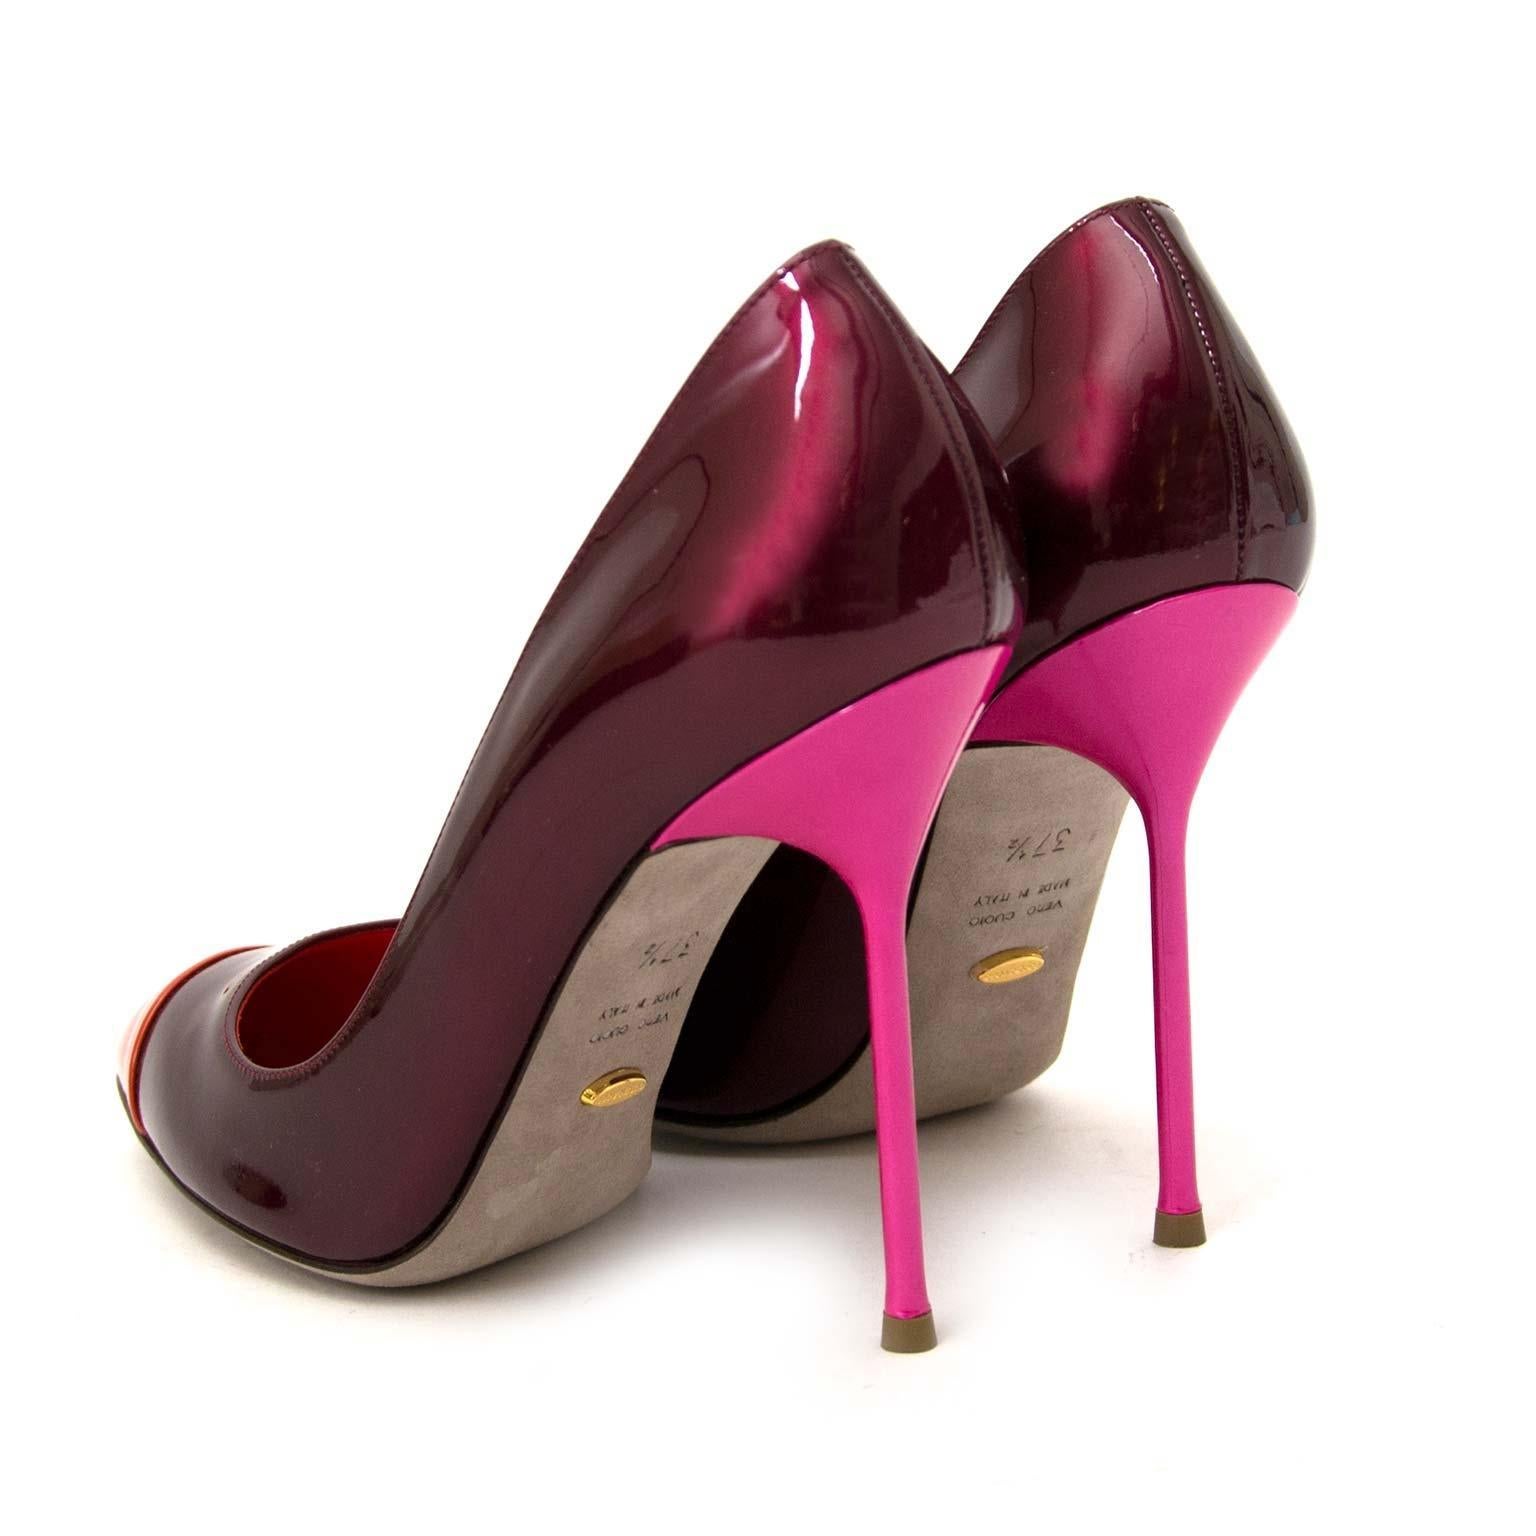 Excellent condition

Sergio Rossi Multicolor Patent Leather Cap Toe Lady Jane Pumps - Size 37.5

These beauties by Sergio Rossi are made from calfskin patent leather in three colors (a burgundy body, an orange toe tip and a pink heel). 

With these